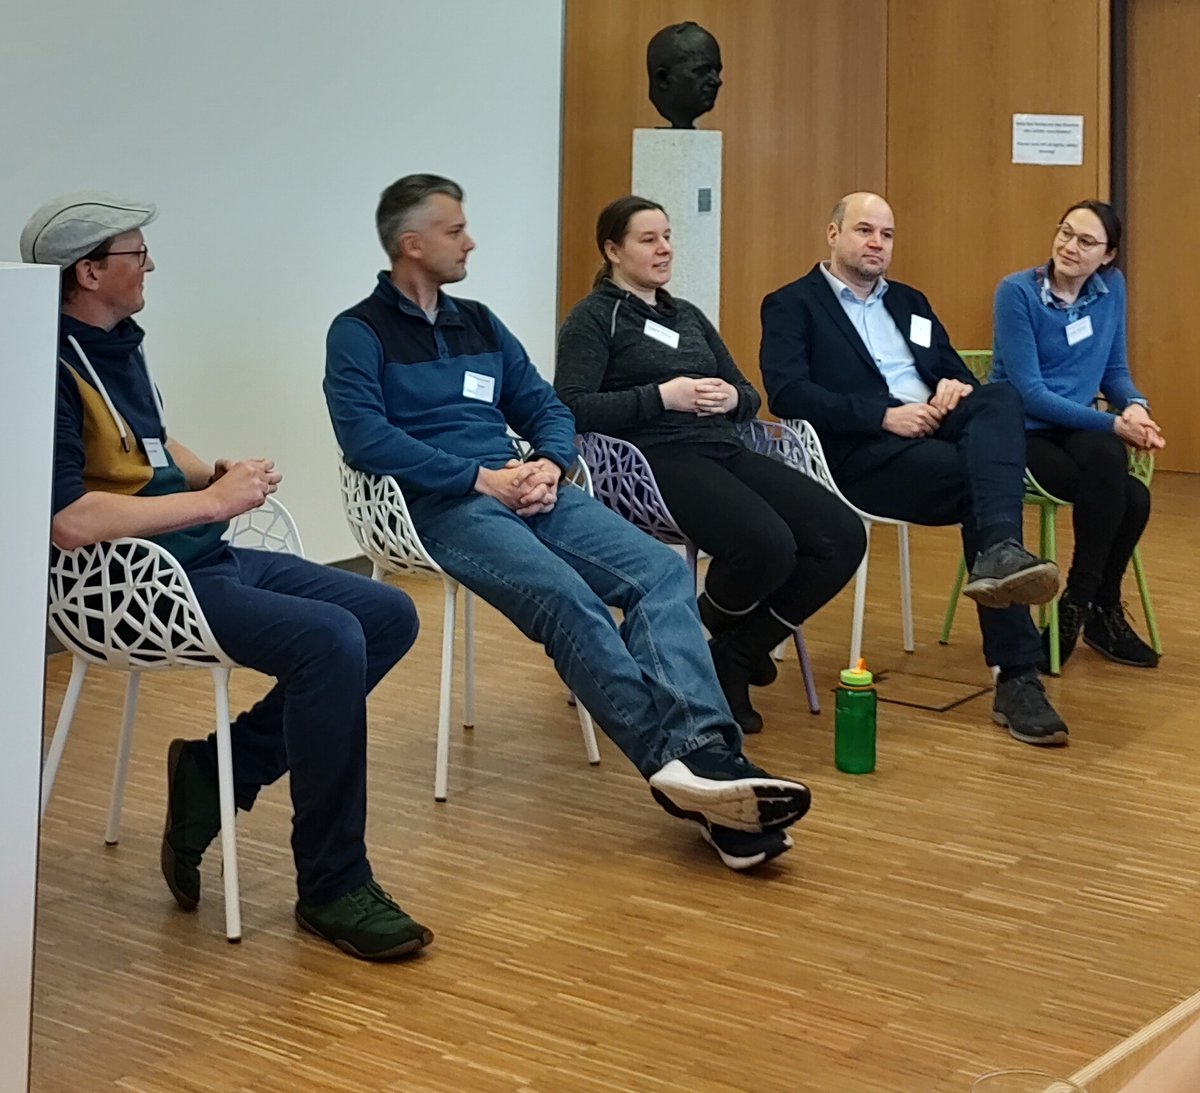 LoG Meetup Panel Discussion #Munich @LogConference w/ @Mniepert, Josephine Thomas, @ingo_S , and @BurkholzRebekka . Thanks to Pascal Welke for being our moderator! 🤗